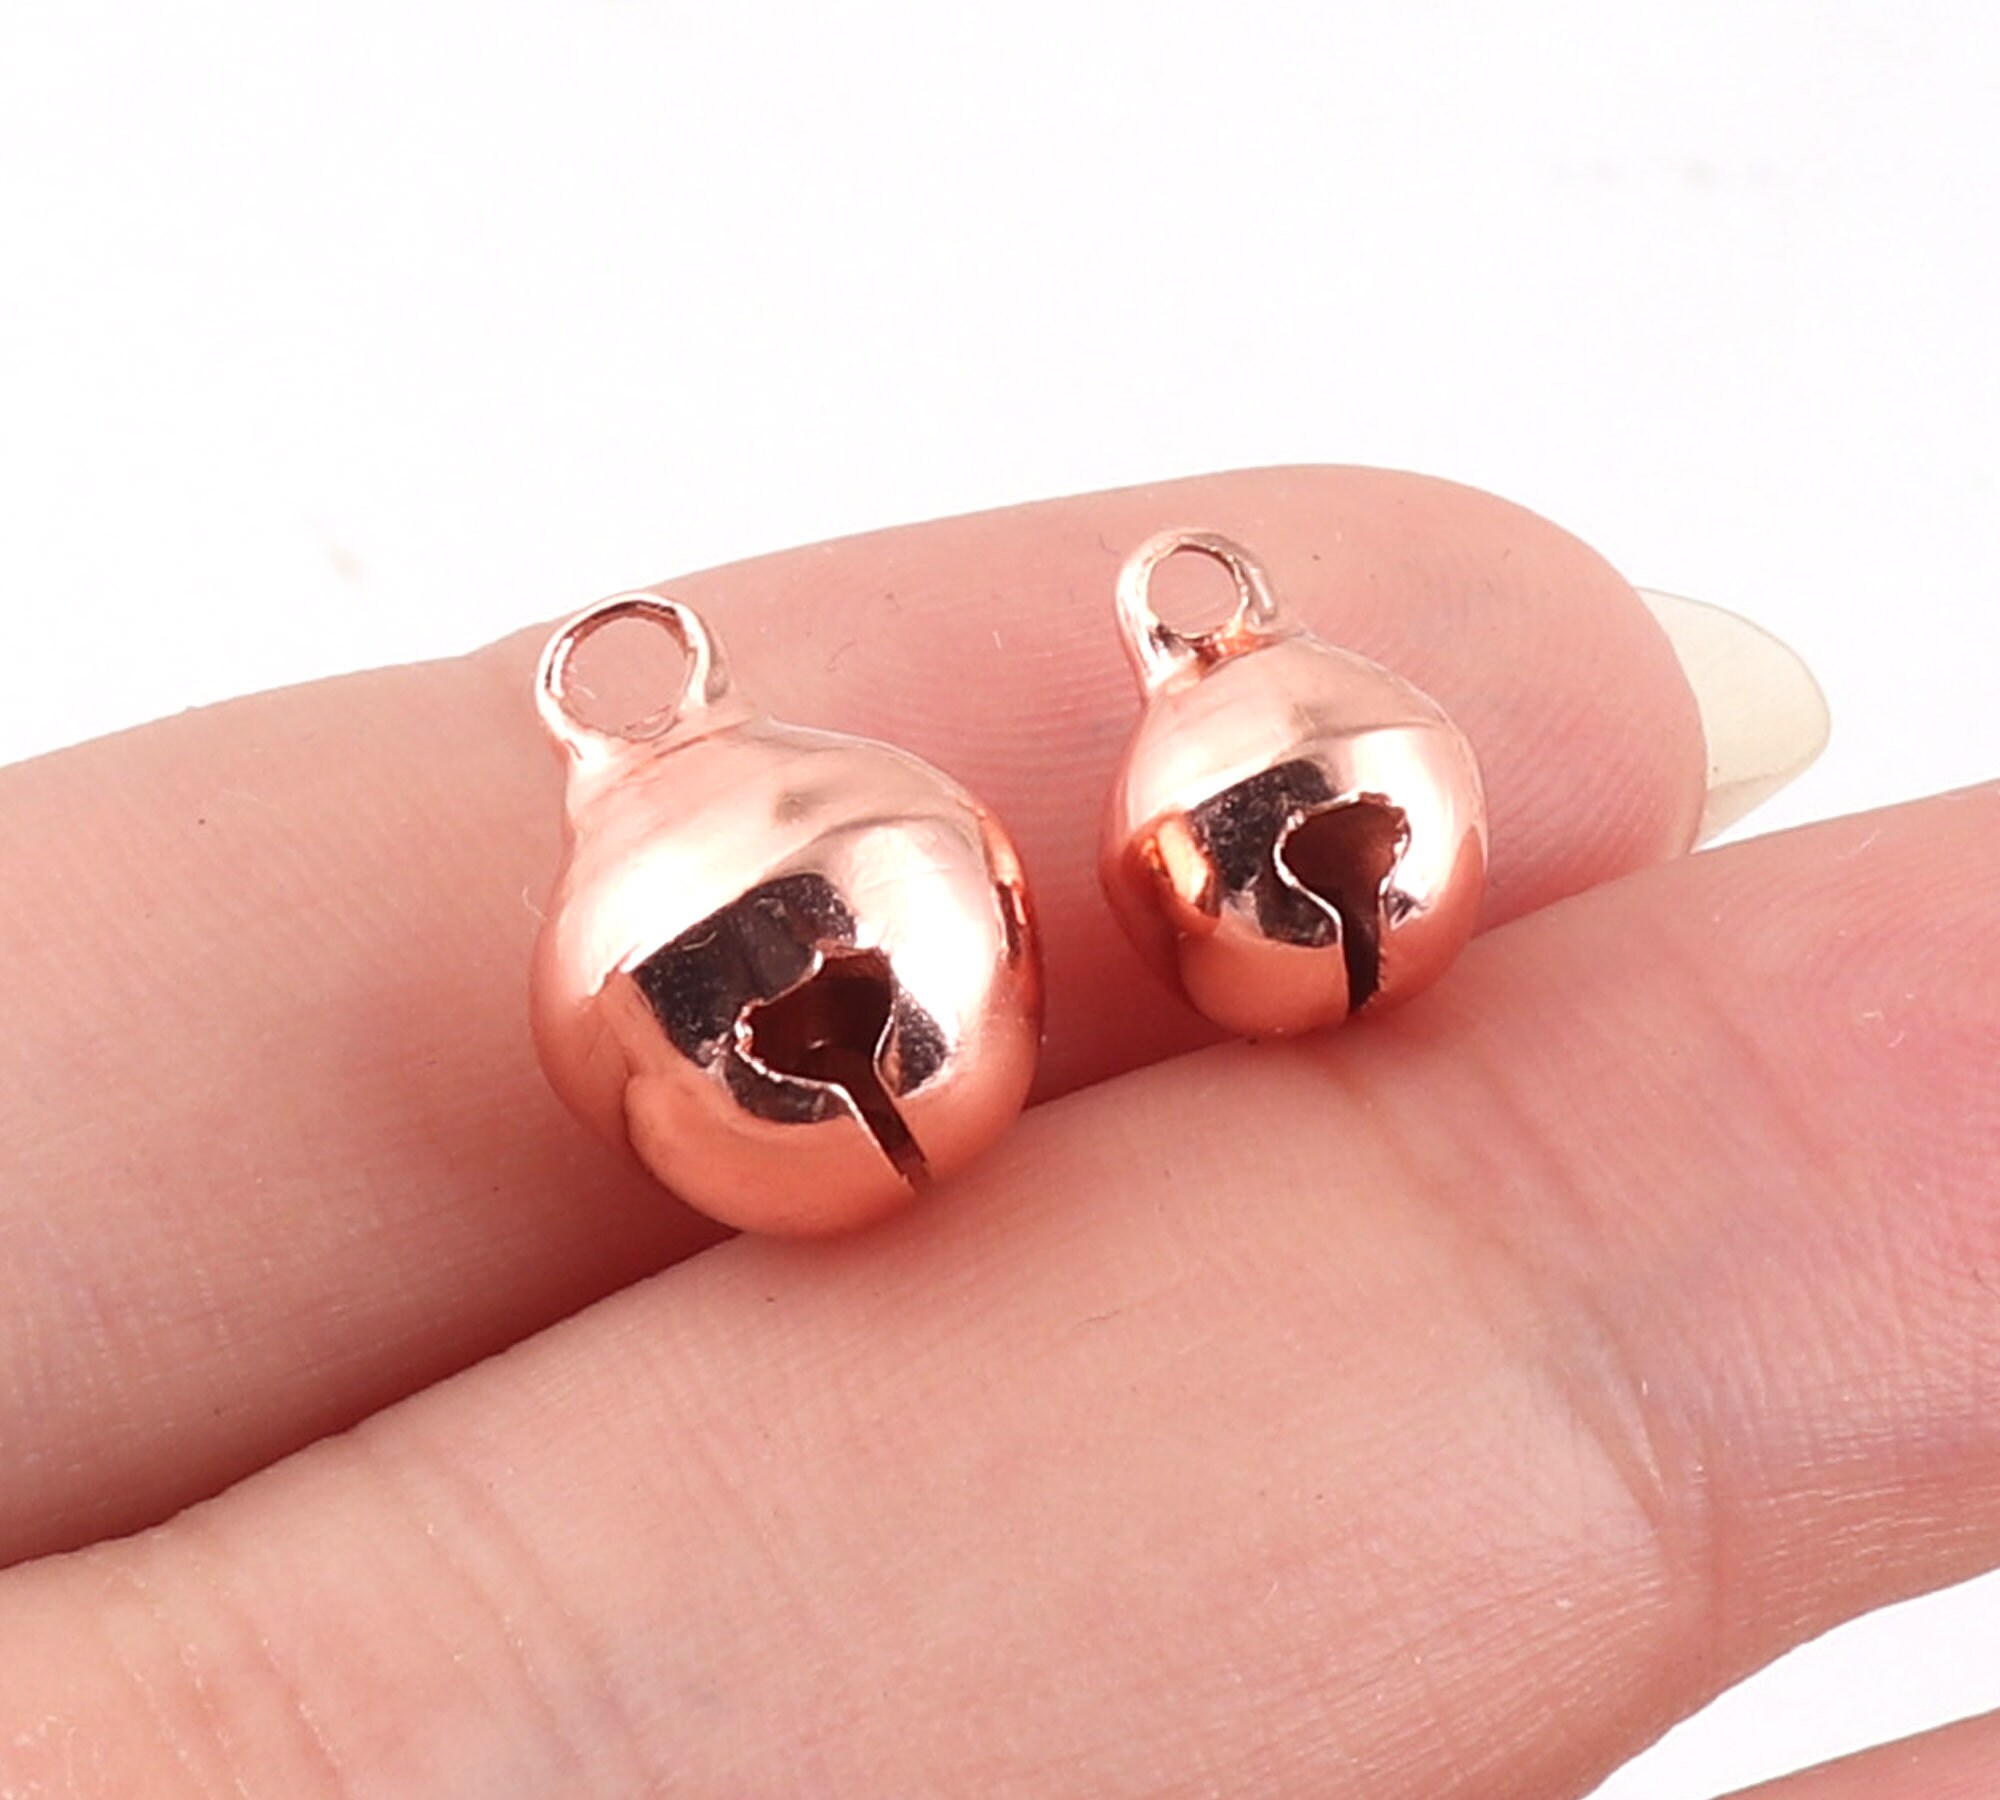 5mm / 0.2 Super Tiny Copper Jingle Bells Charms, in Gold, Silver and Bronze  Color, Perfect for Jewelry / Doll Clothes/teddy Bear Making -  UK